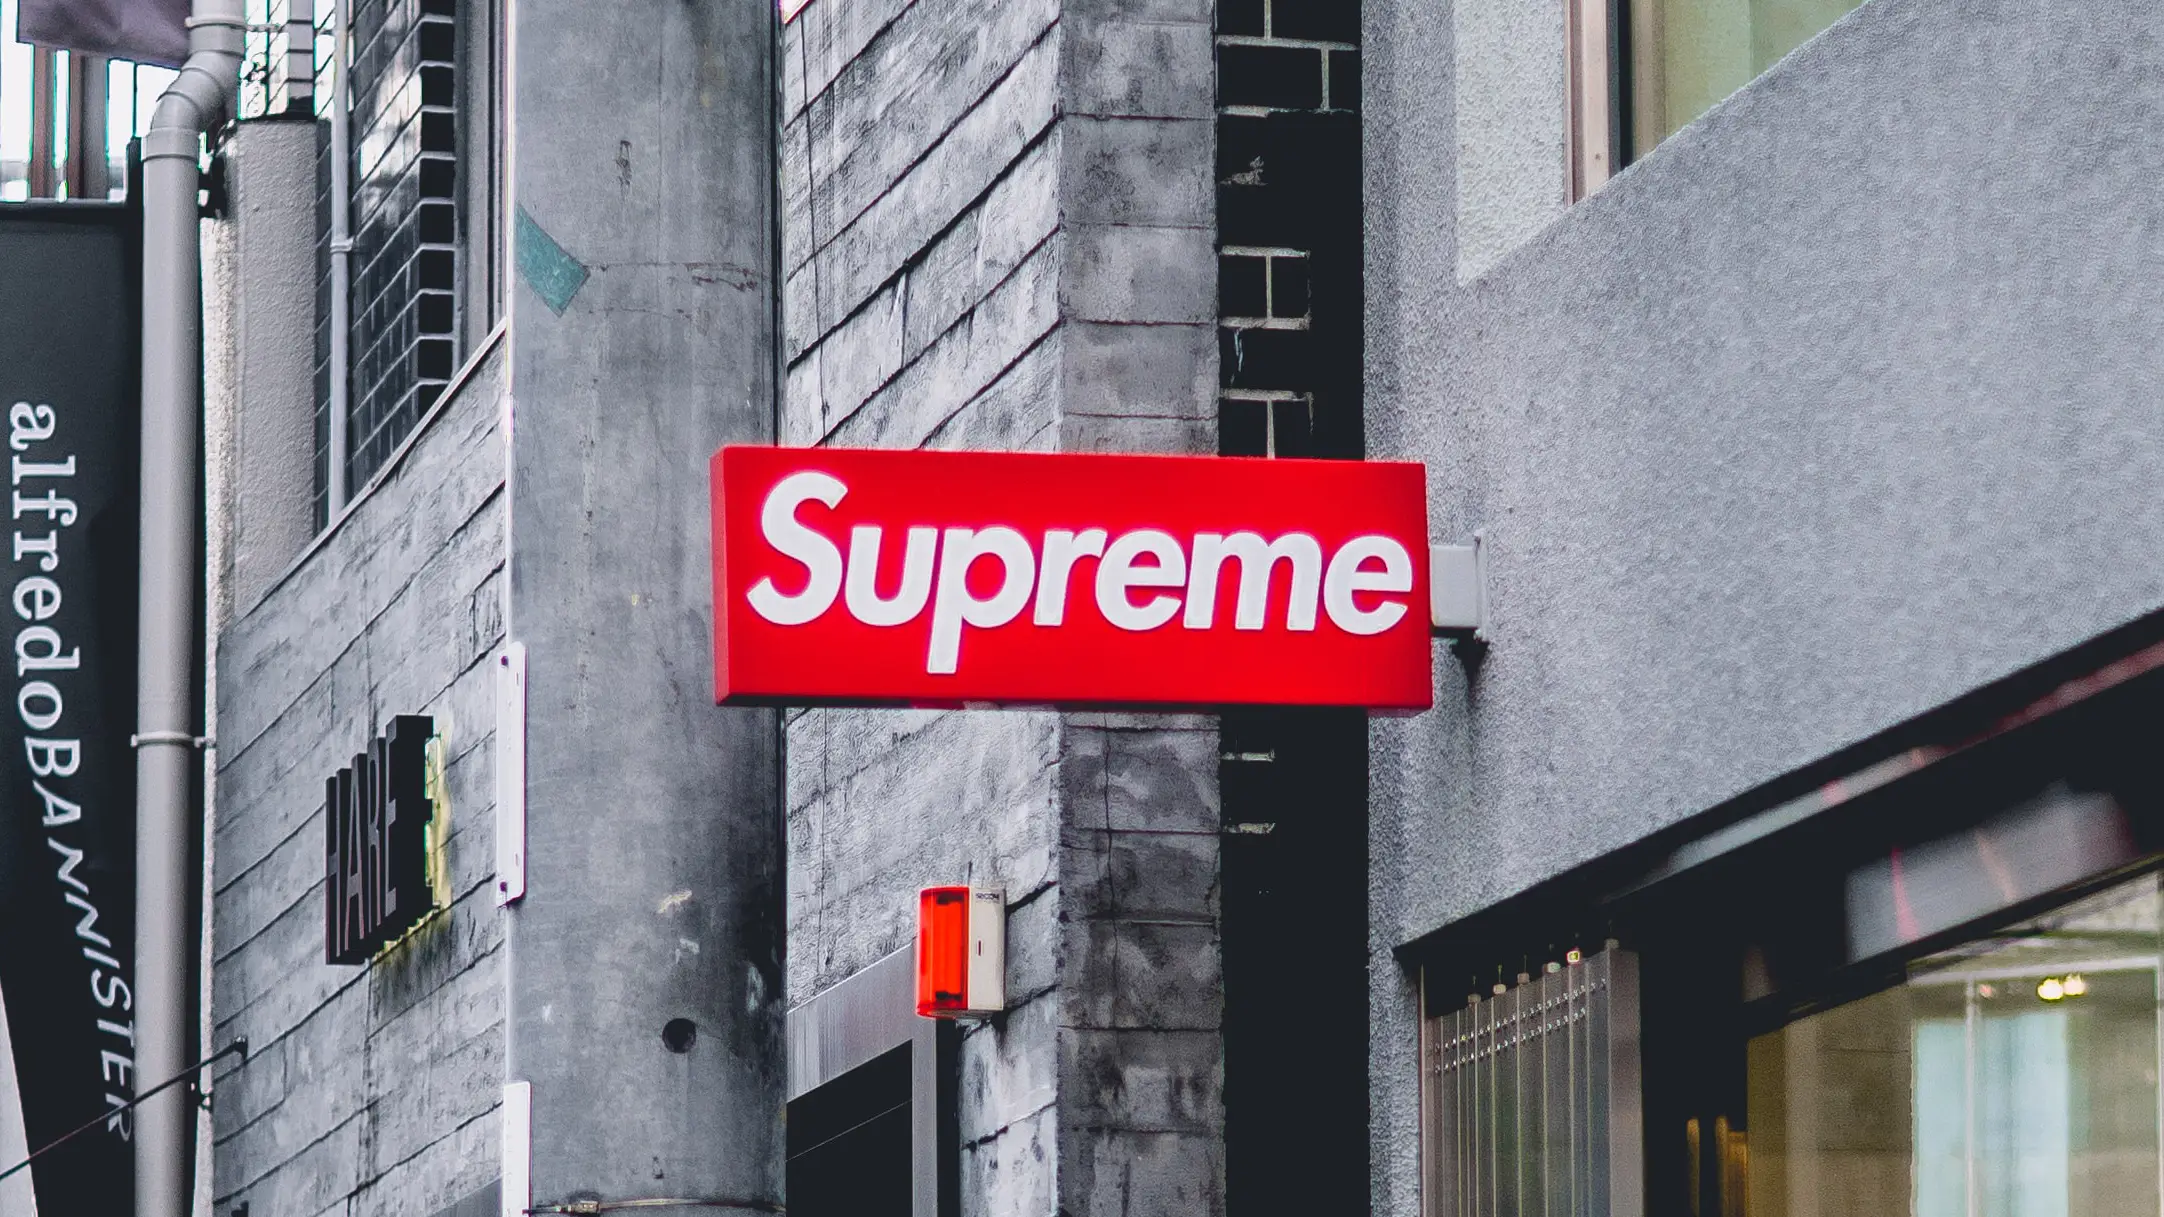 How to Cop Supreme 2022, Guide & Tips